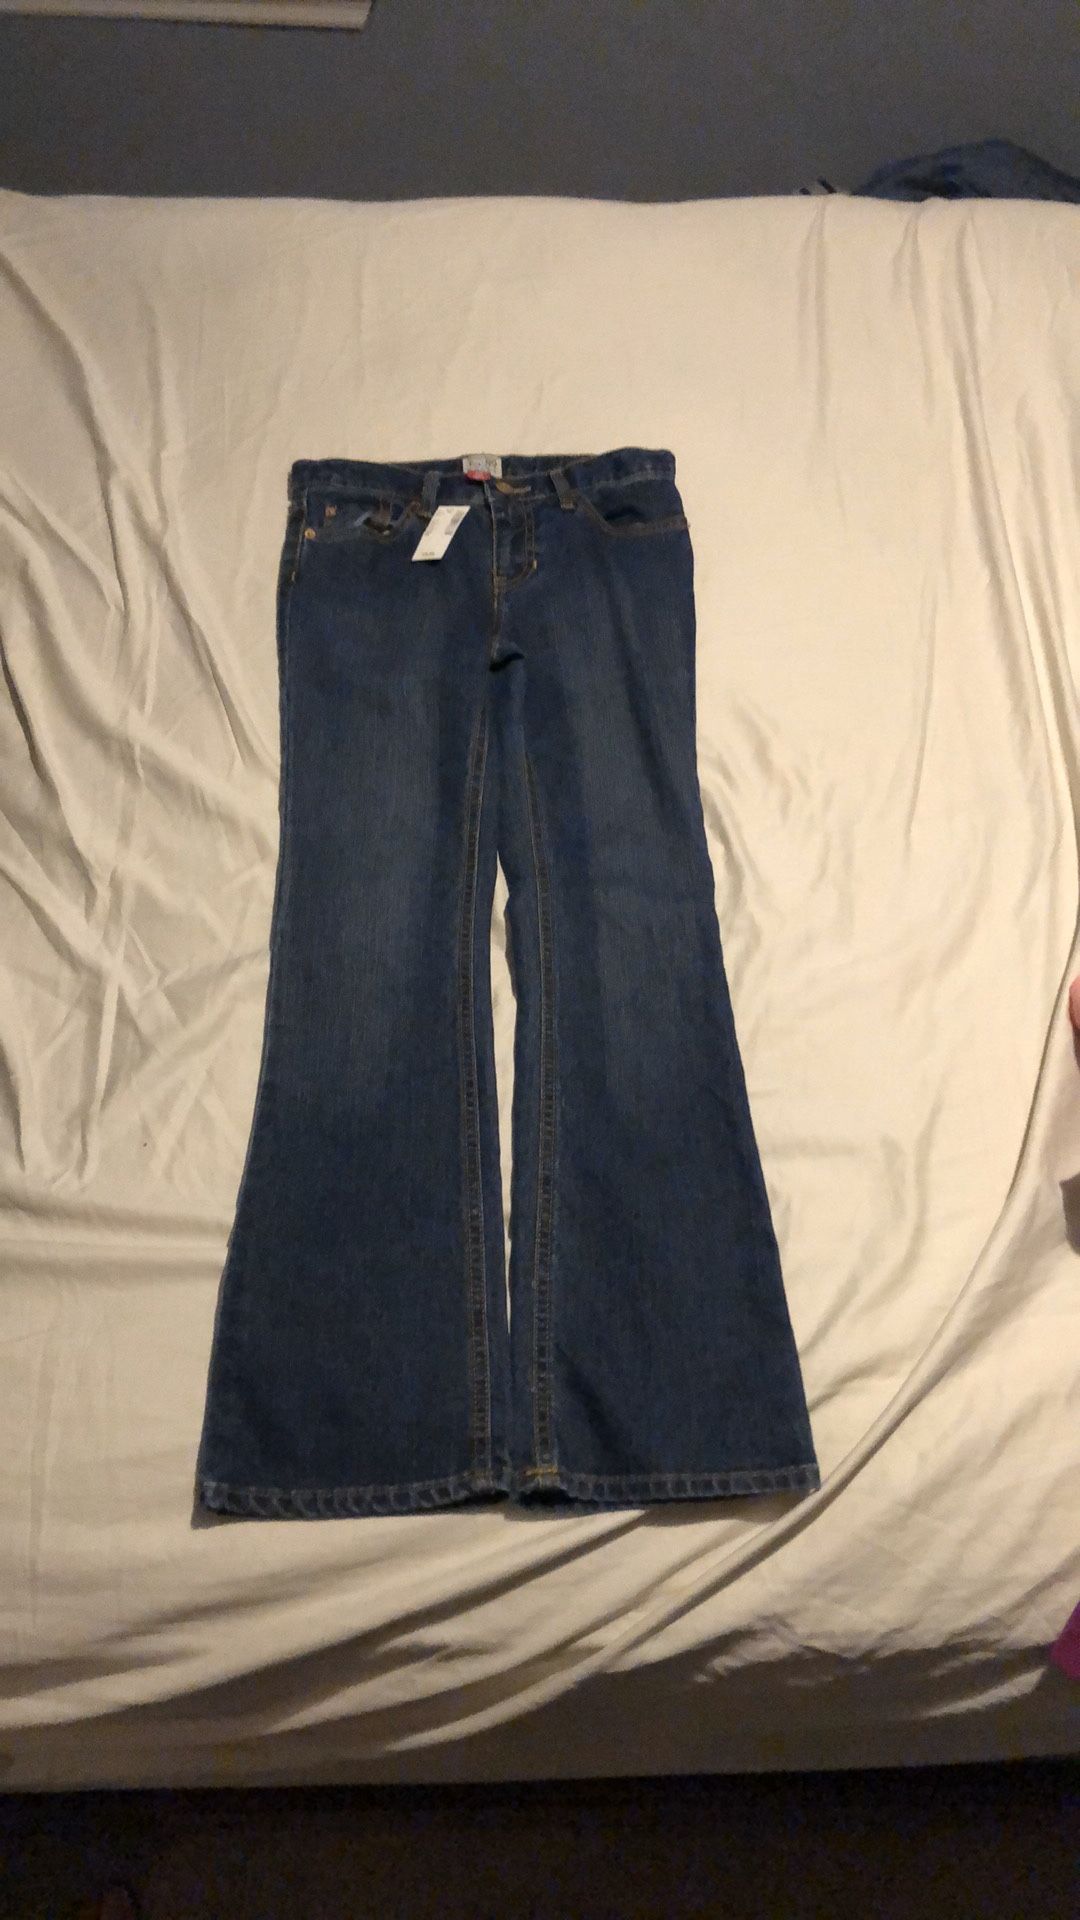 Brand new girls boot cut jeans, size 12. The children’s place.